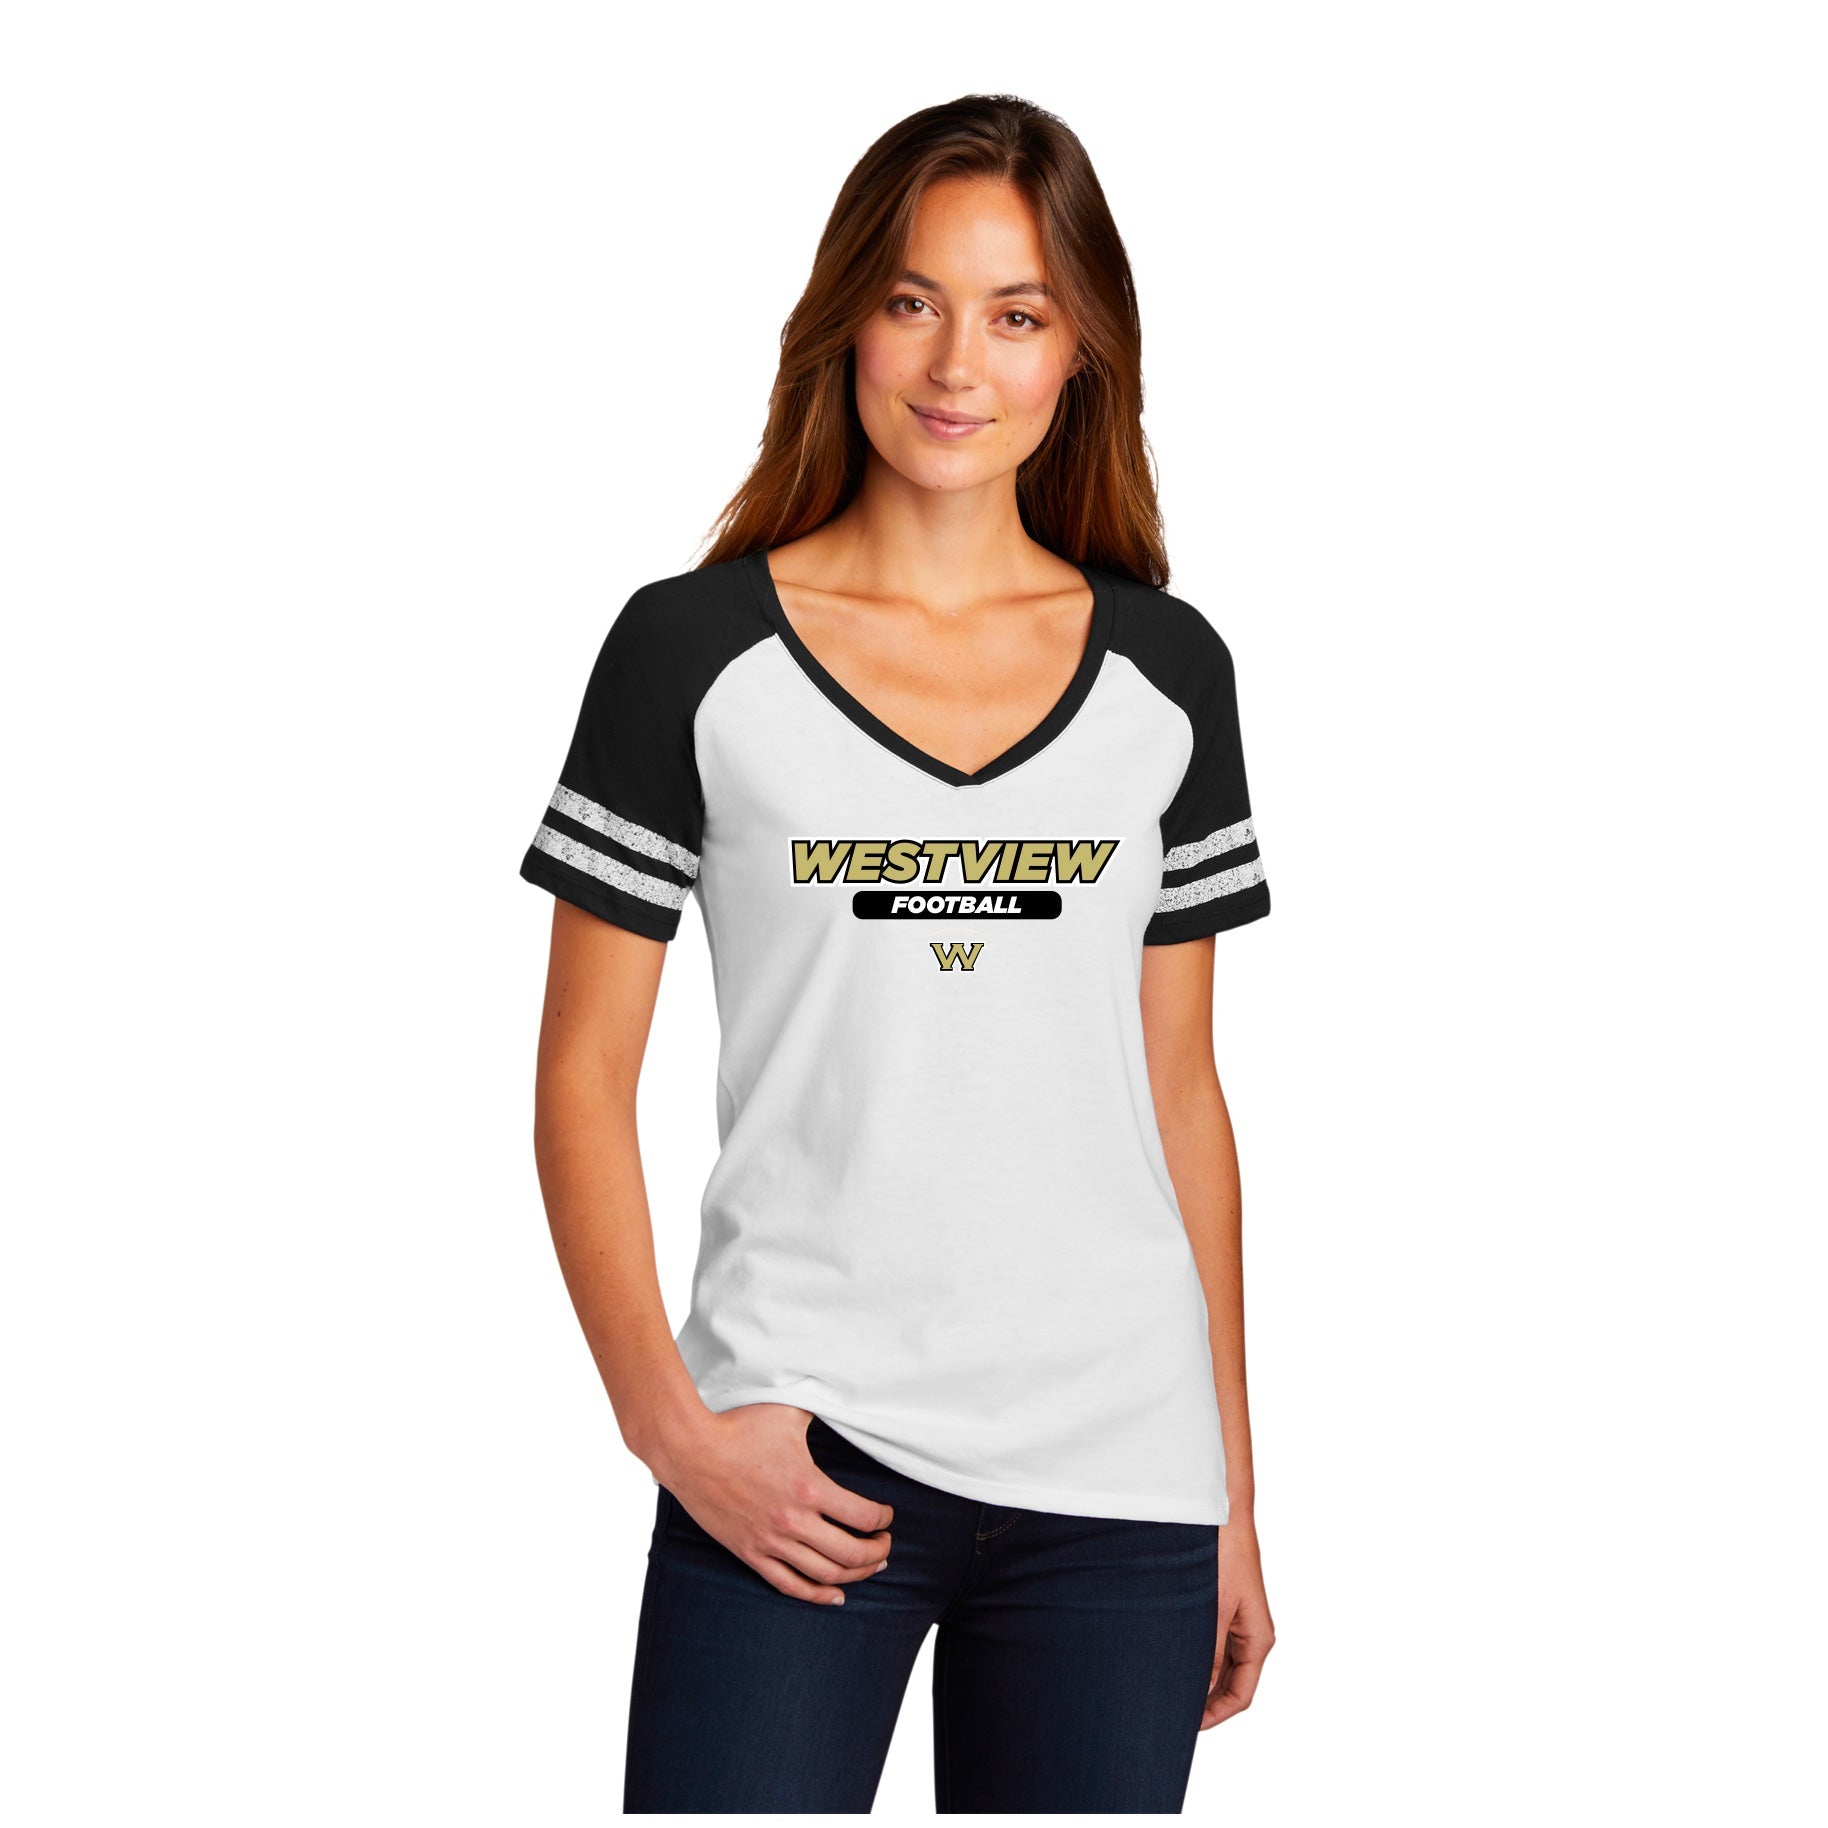 WESTVIEW FOOTBALL FRONT CHEST - WOMENÕS GAME V-NECK TEE